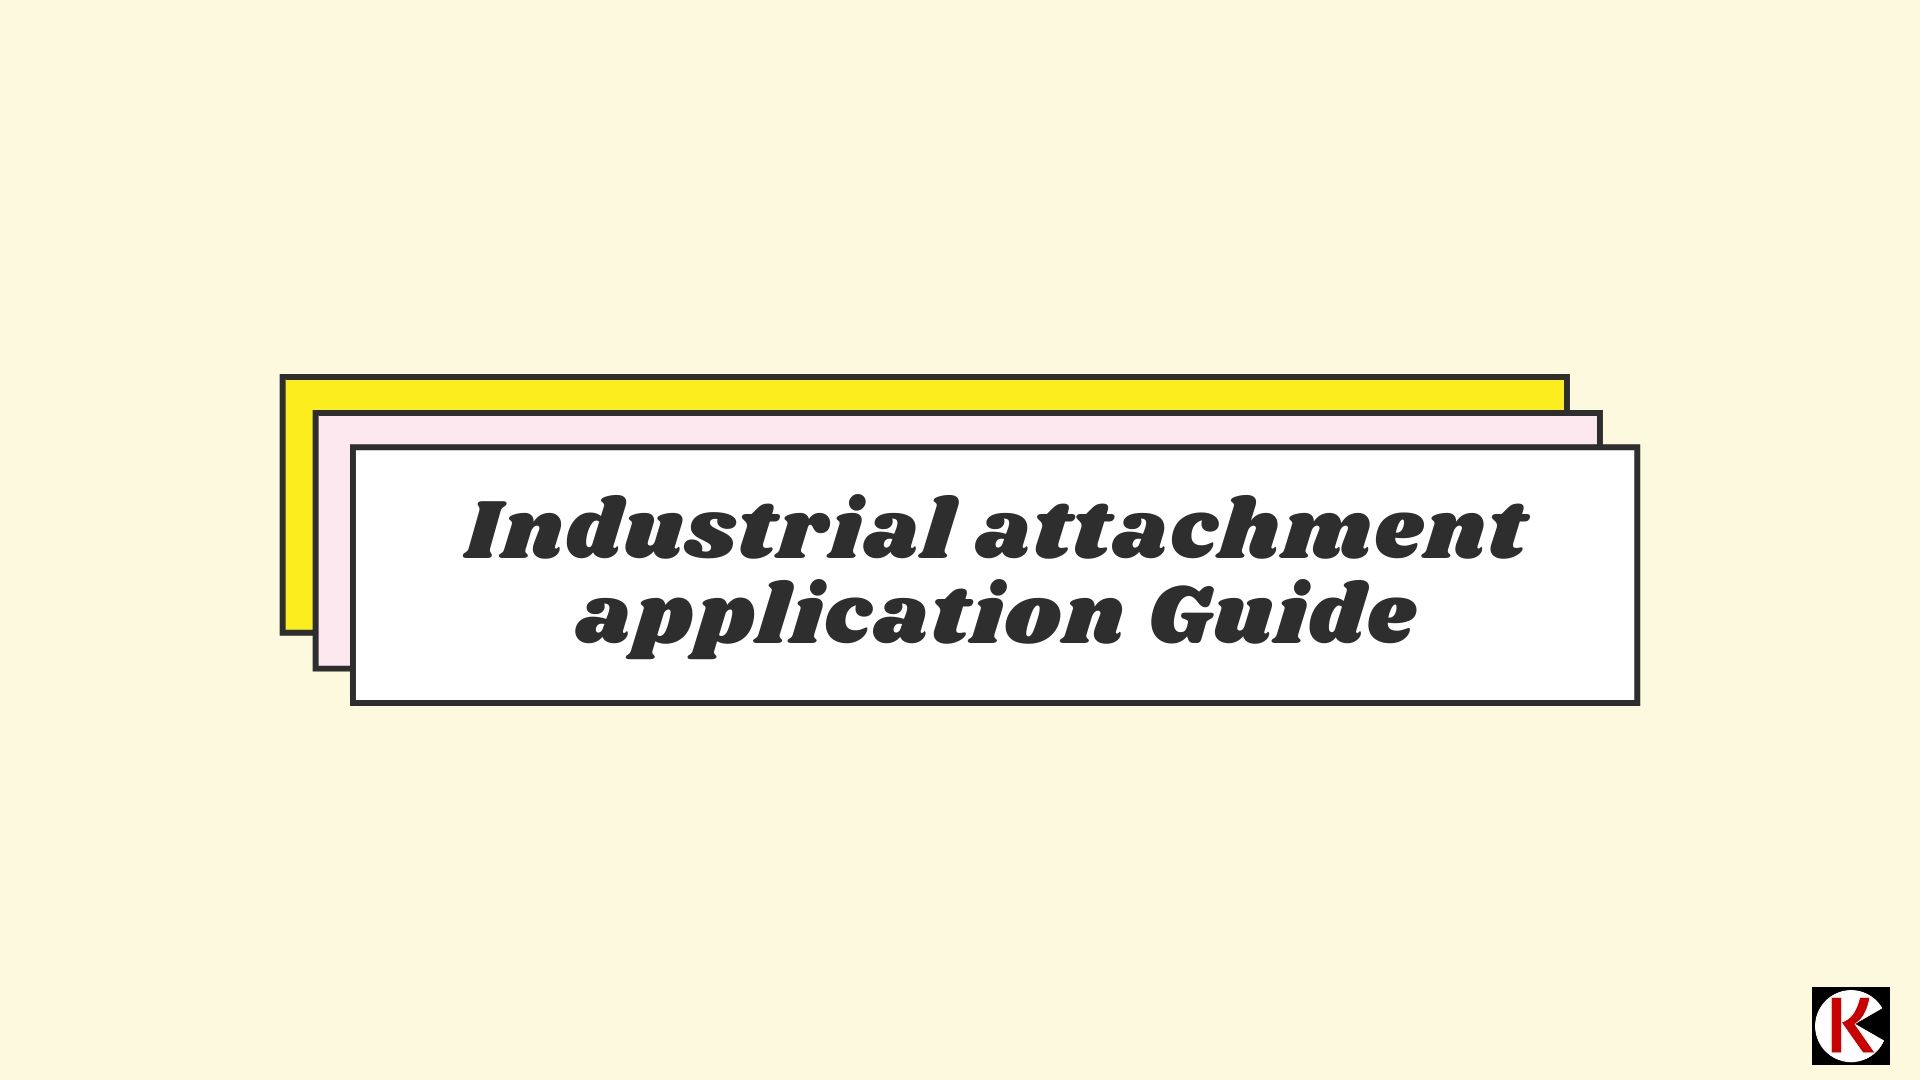 How to Apply For University Industrial Attachment (Requirements)